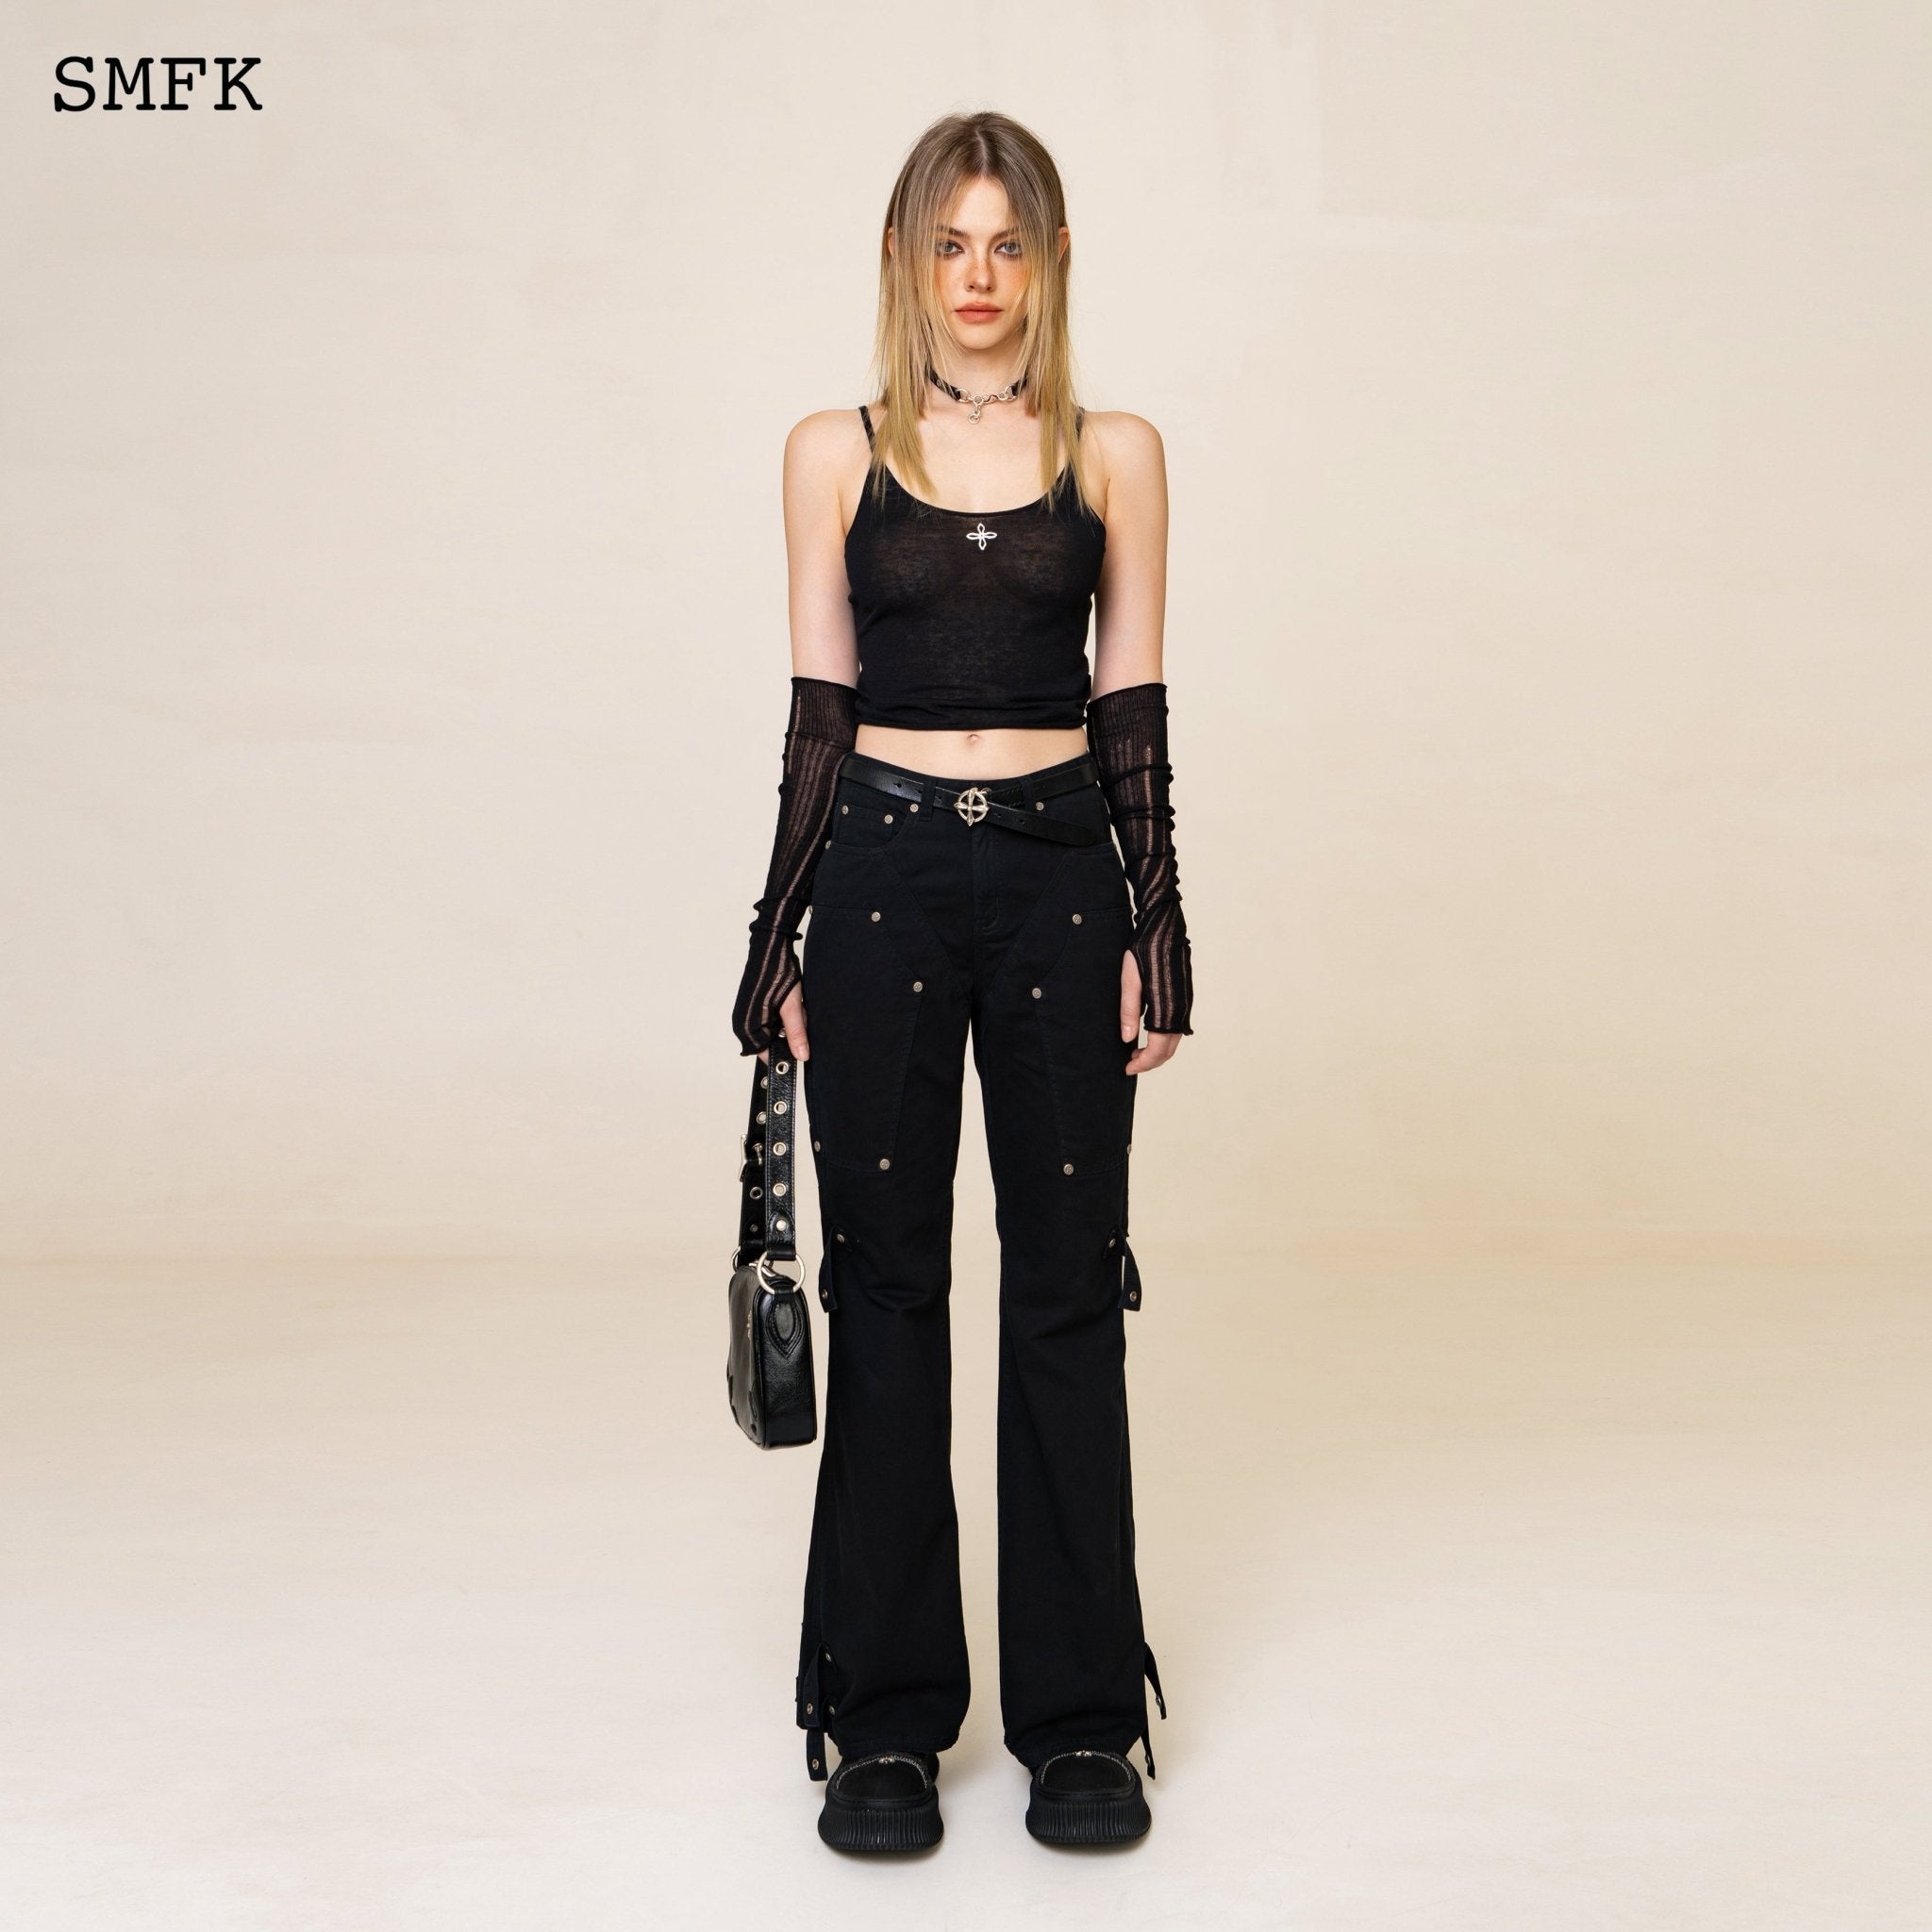 SMFK Compass Classic Woolen Knitted Tube Top | MADA IN CHINA